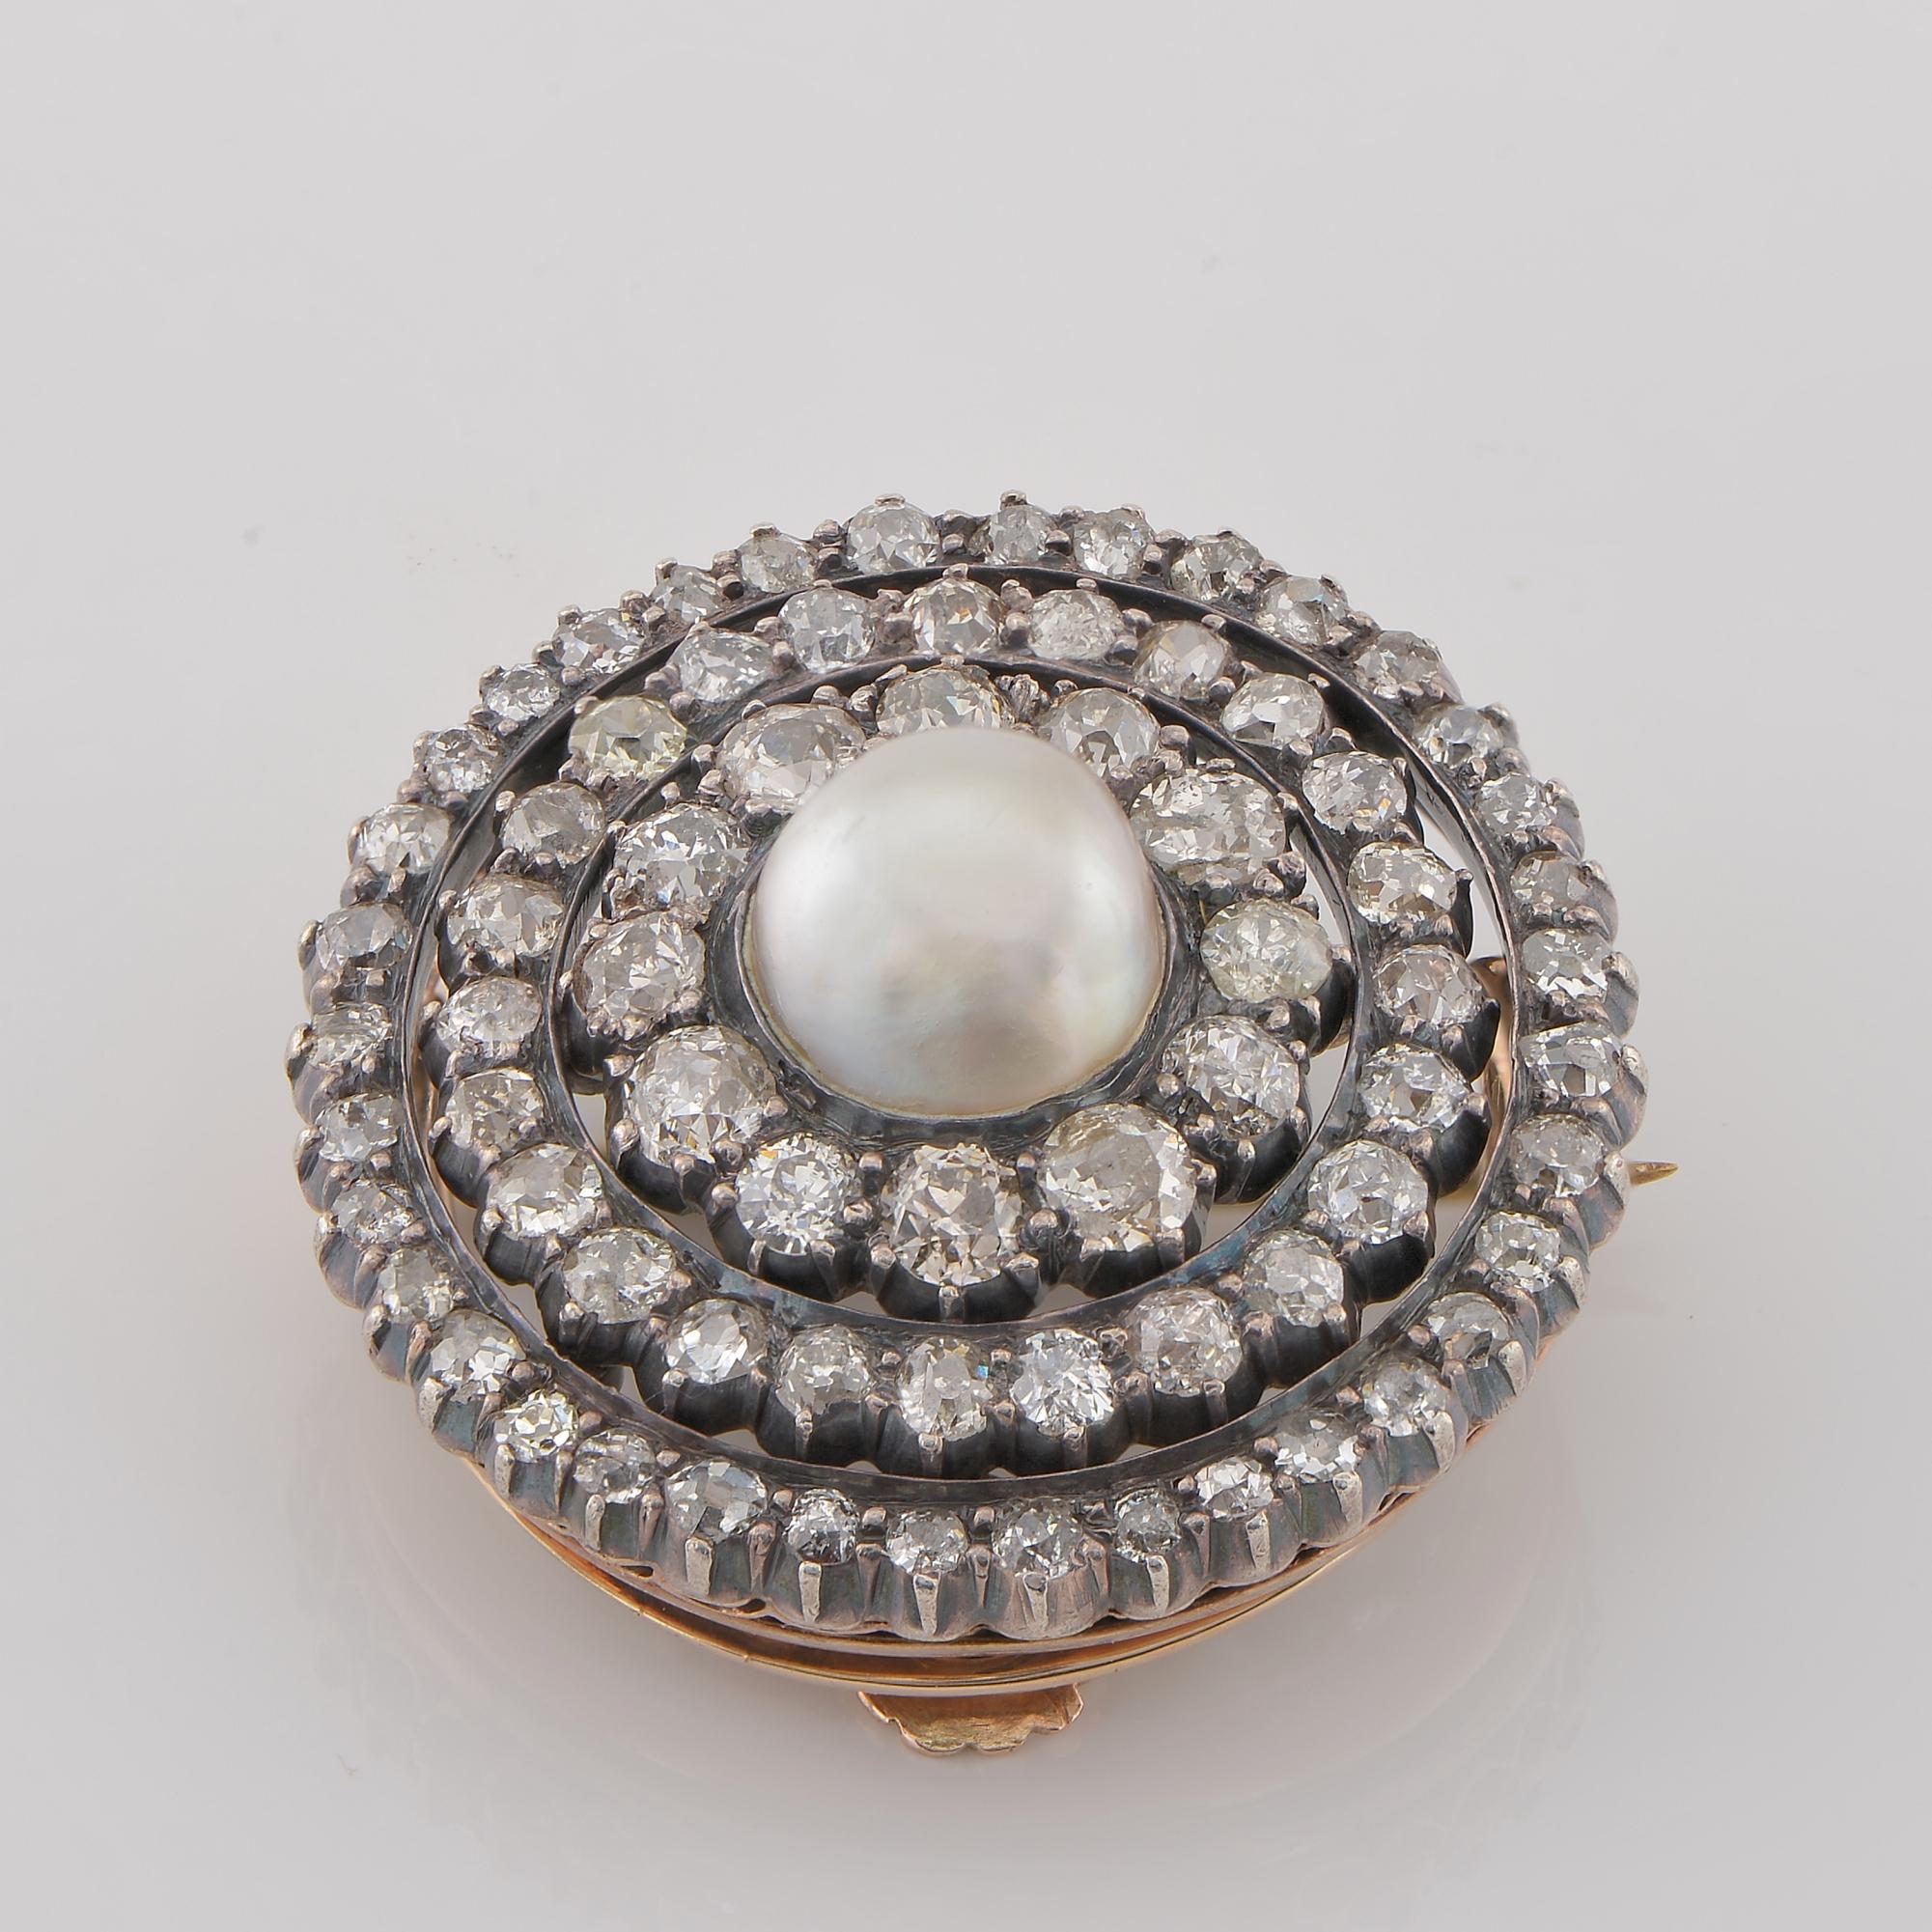 An unique Victorian Diamond Pendant brooch, specially made at the time to be an understated large pendant or a magnificent brooch 
An original statement piece dating 1850/1880 ca
Hand crafted during the time of solid 18 kt gold topped by silver –